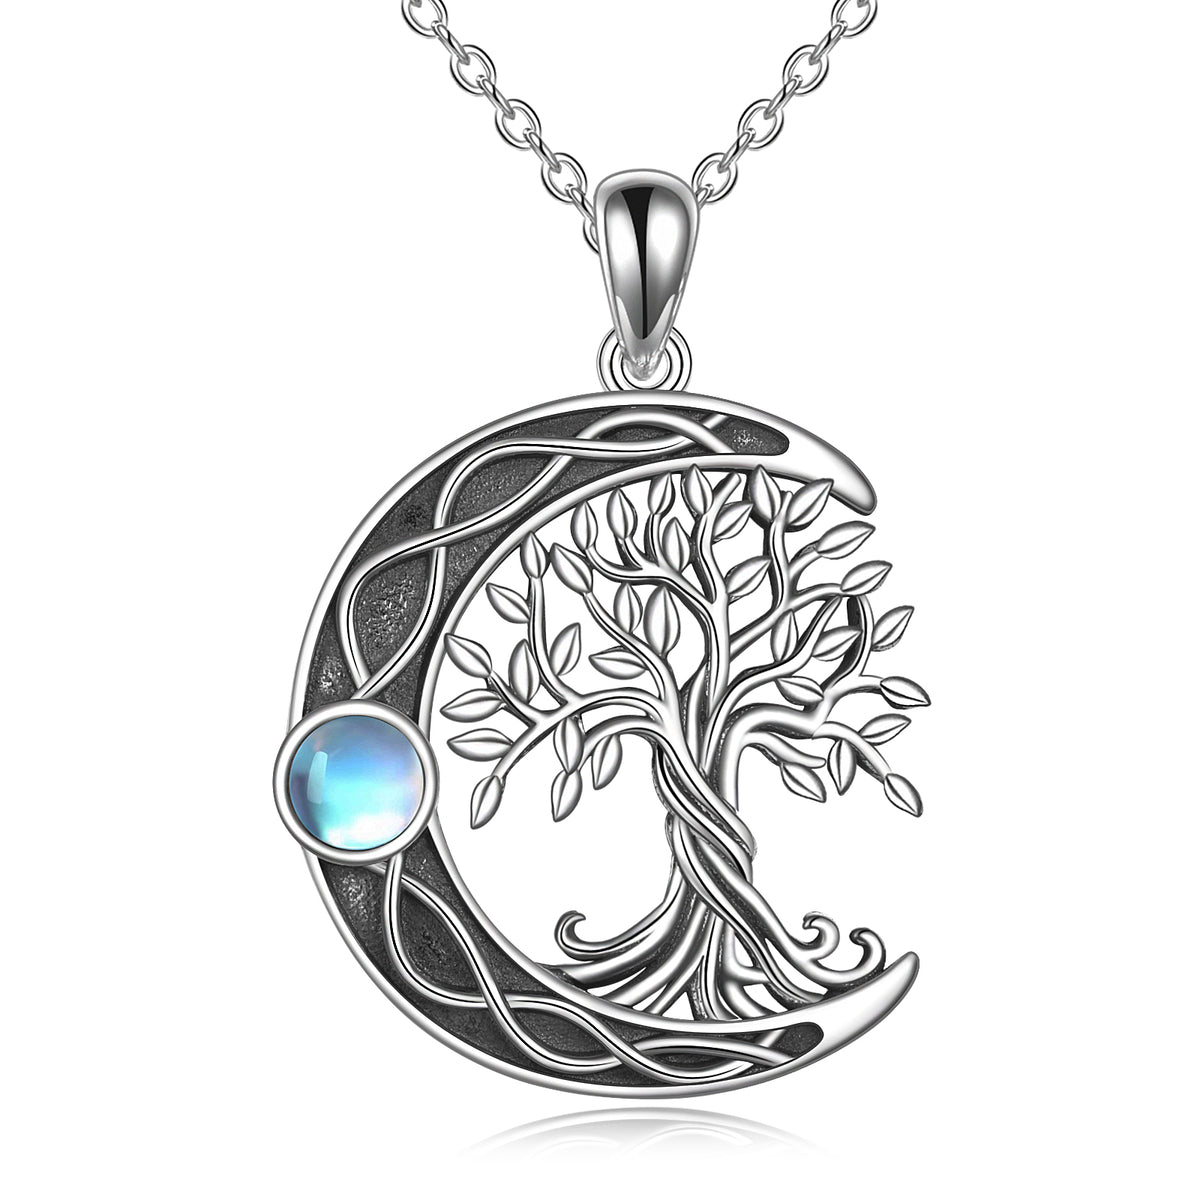 Sacred Roots: Tree of Life Pendant Necklace with Moonstone